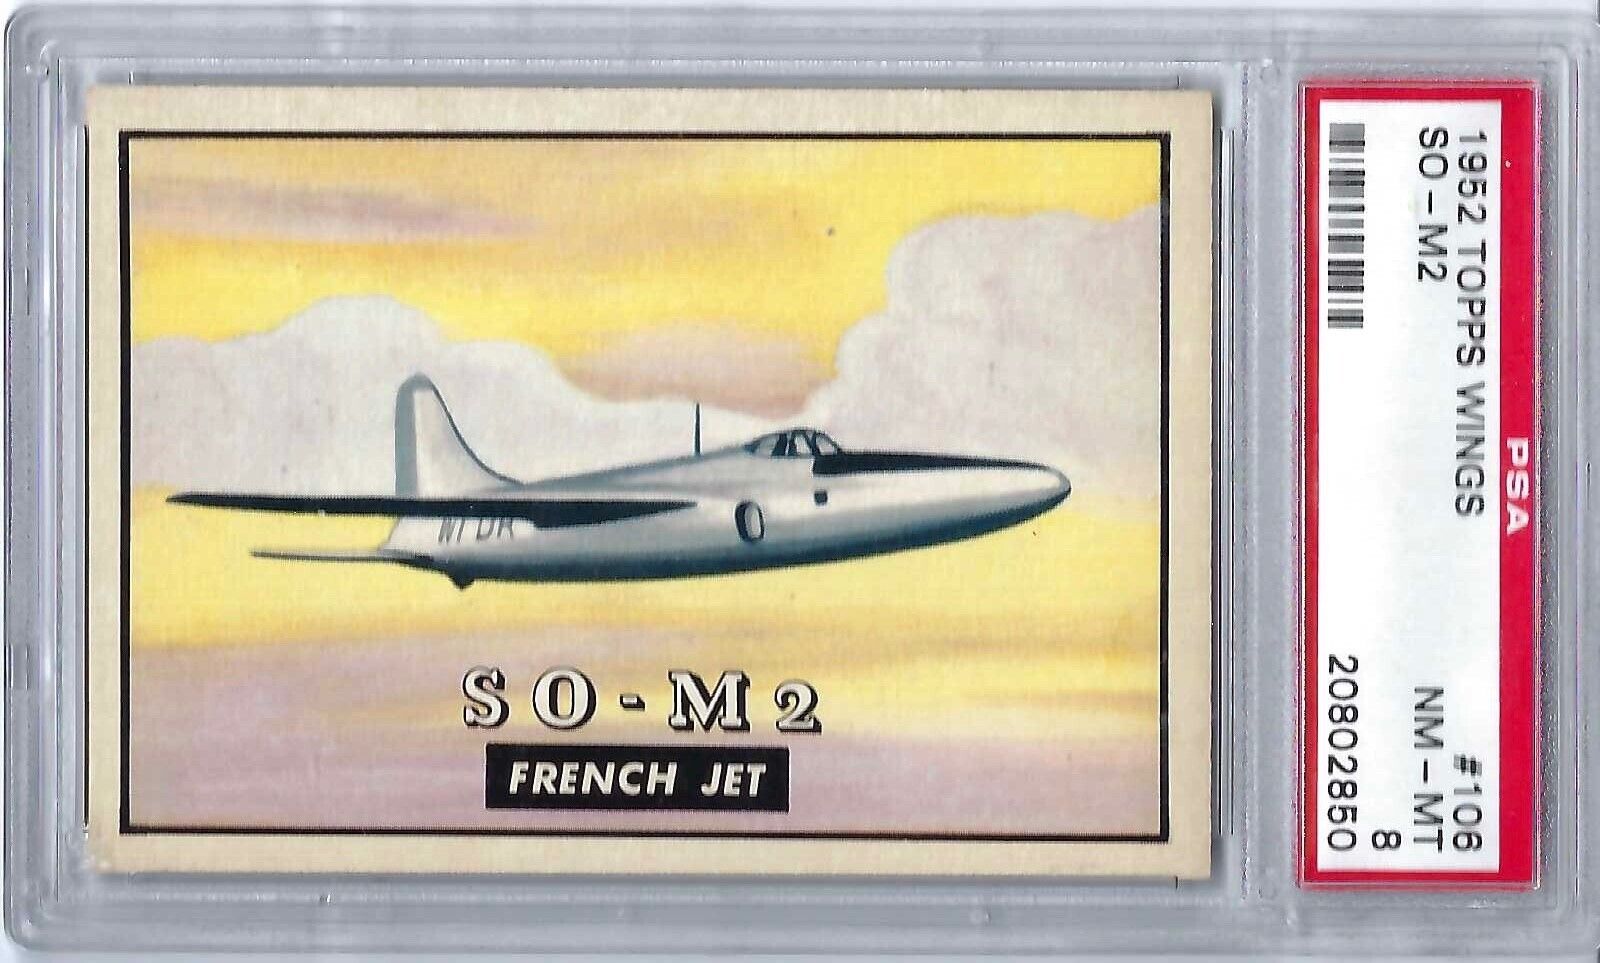 1952 Topps Wings SO - M2 French Jet Card # 106 PSA - 8